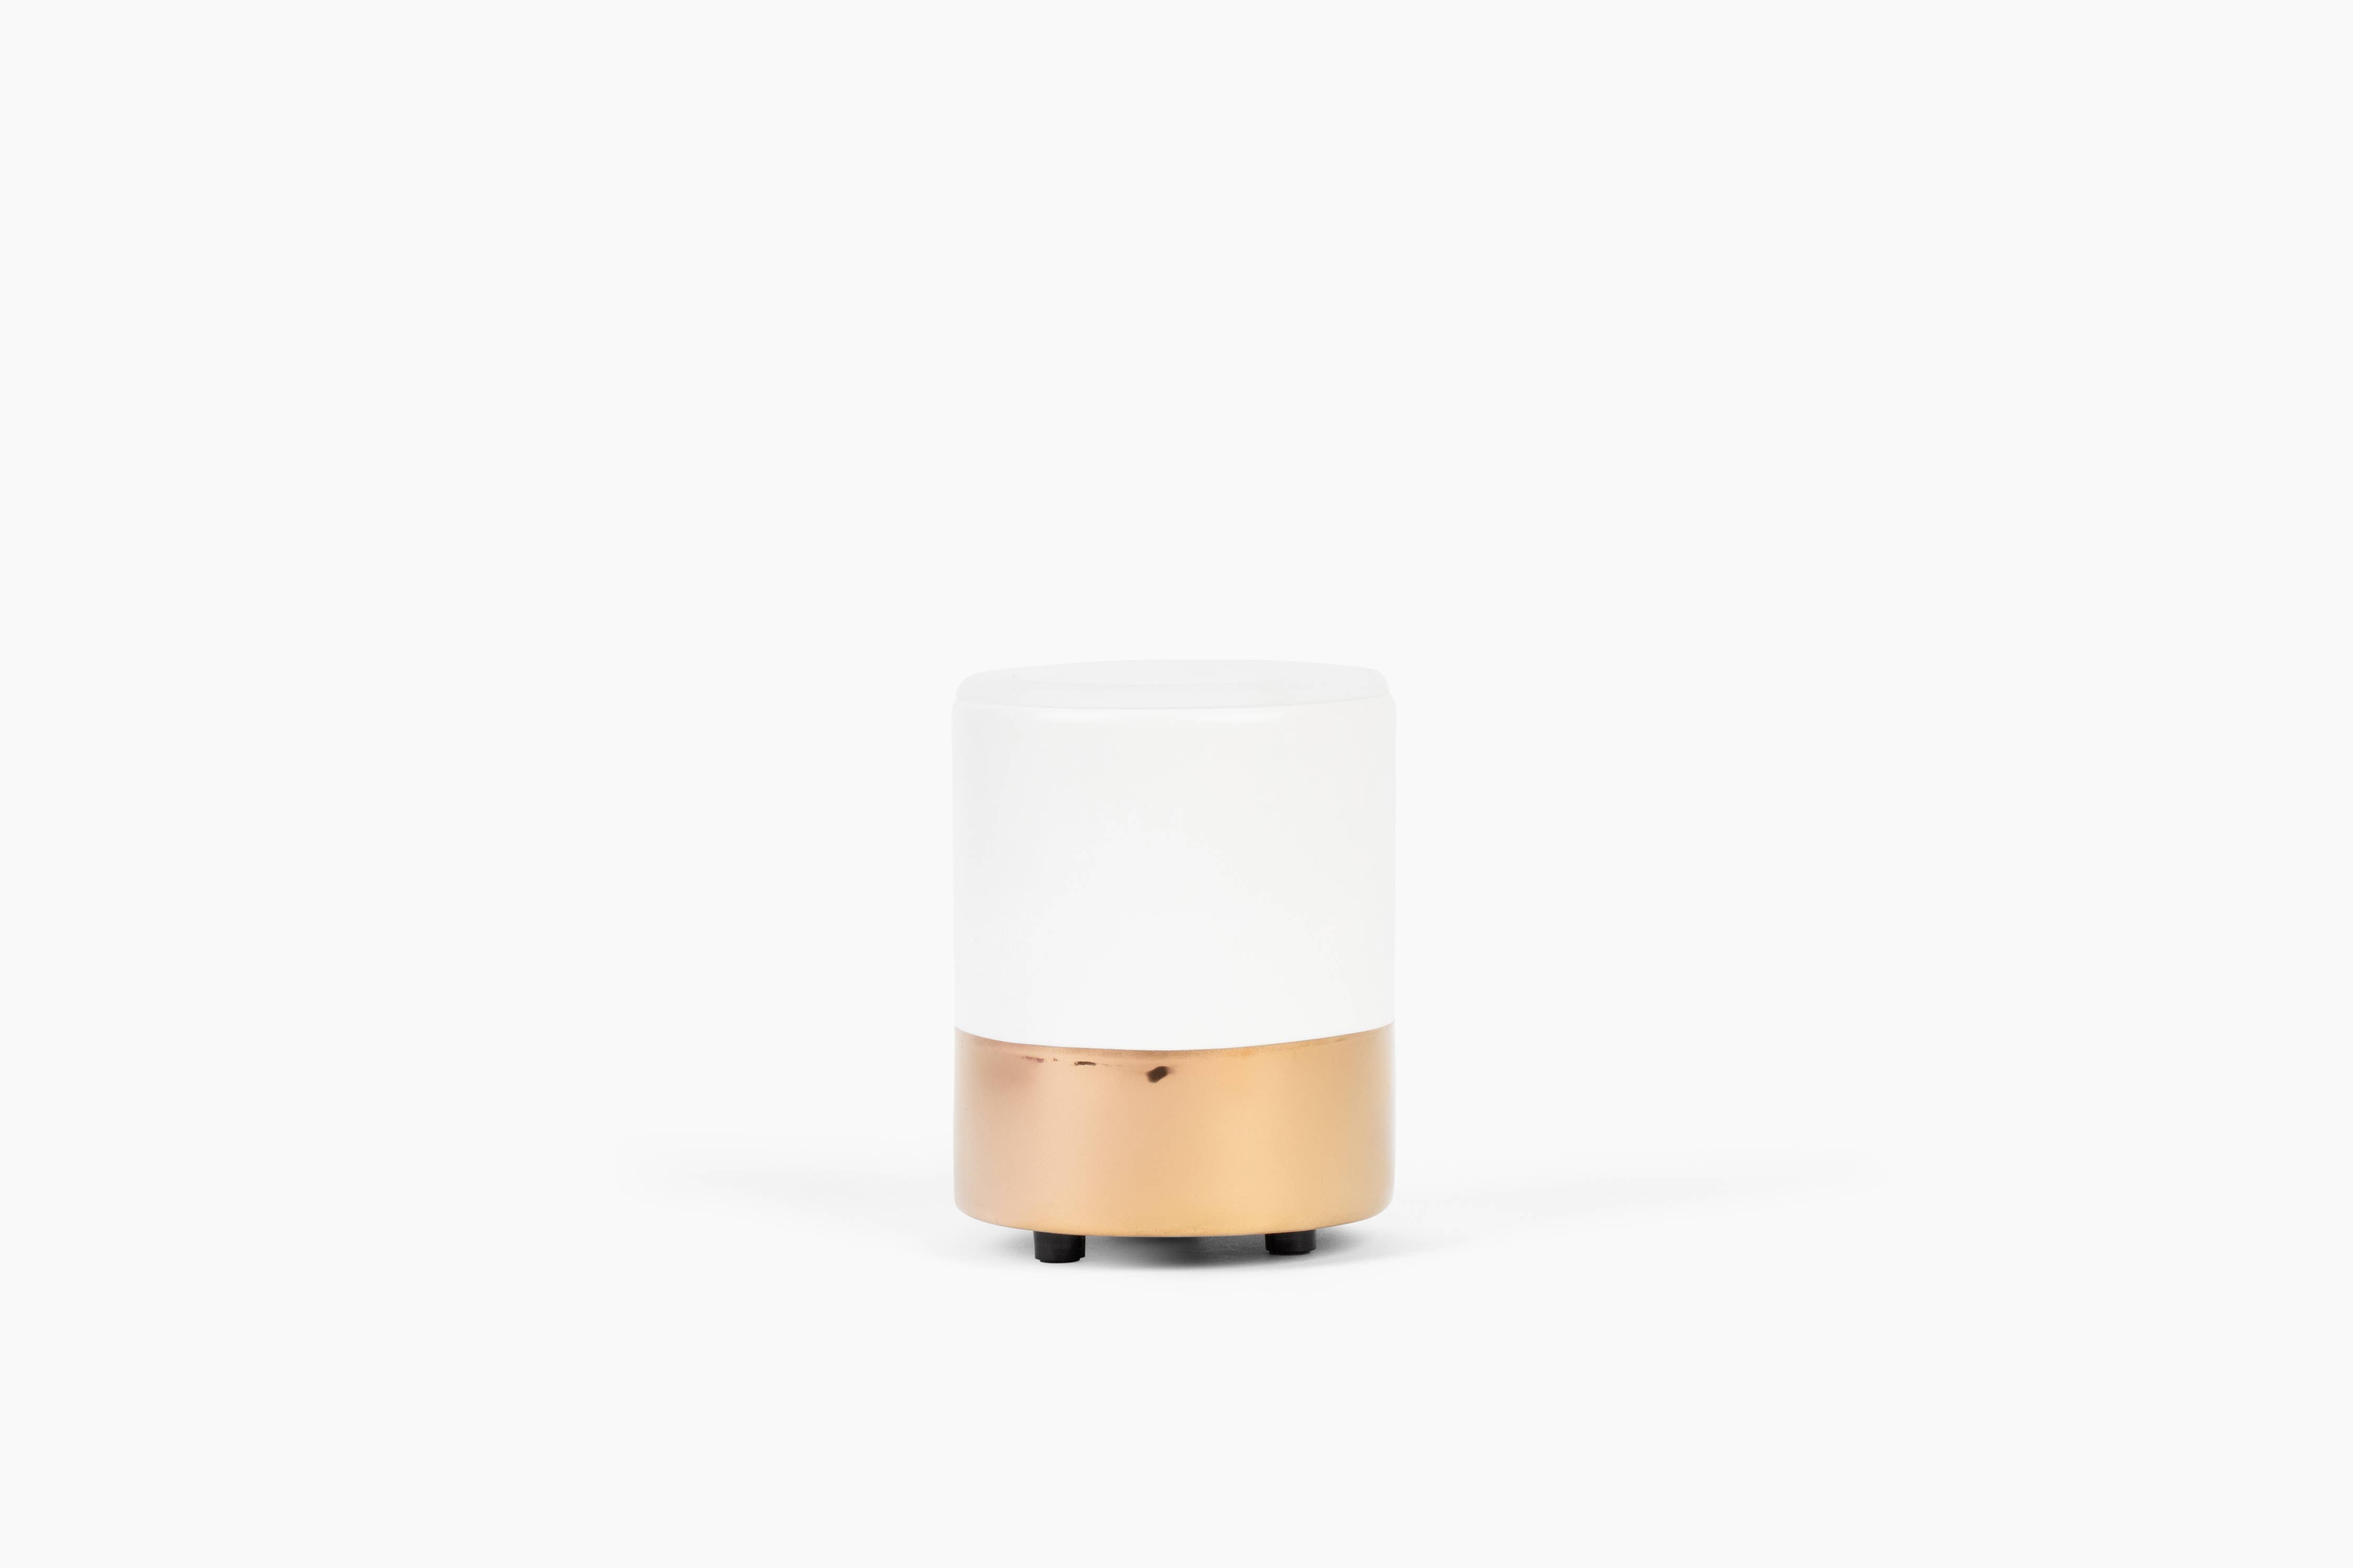 White and Gold Mini Mod Wax Warmer - JMCandles and Home